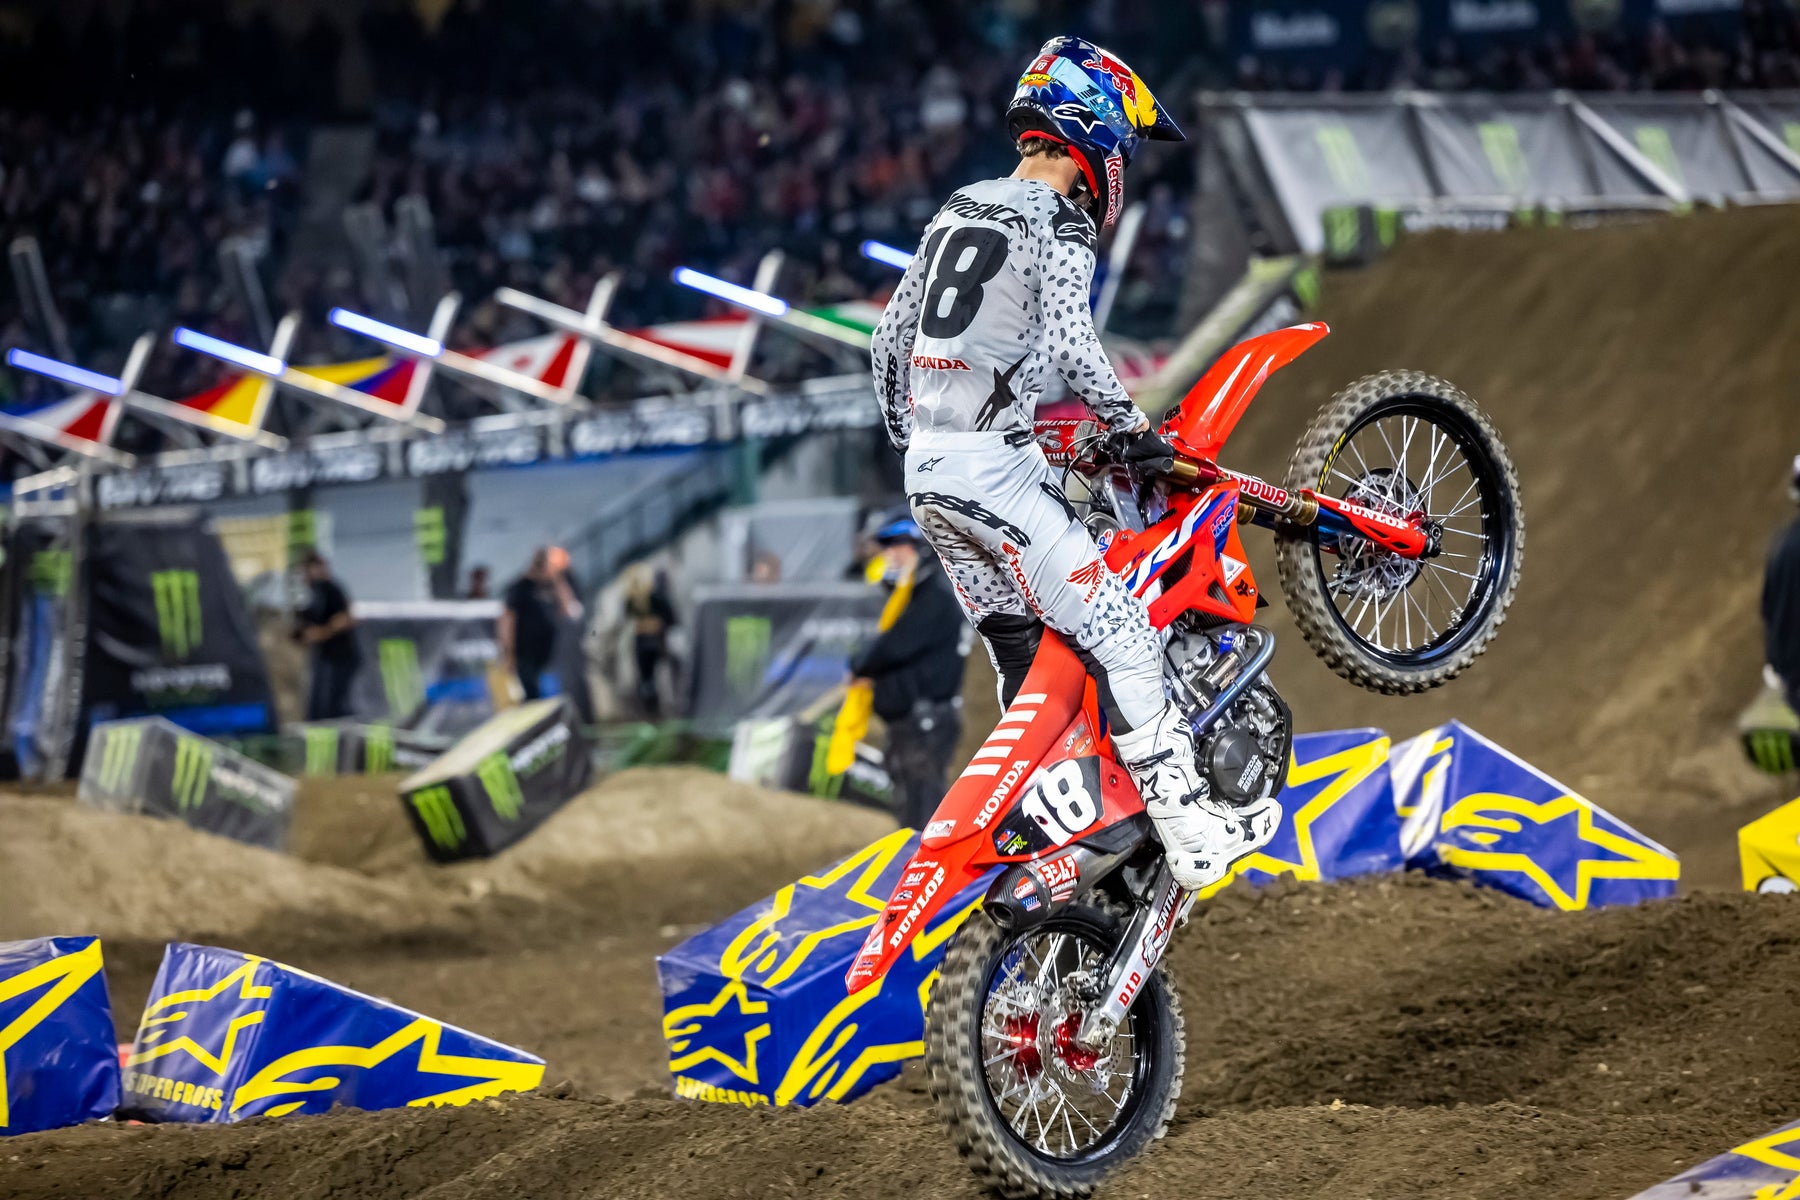 DOMINANT JETT LAWRENCE IS UNTOUCHABLE AT ANAHEIM 250SX WEST SEASON OPENER